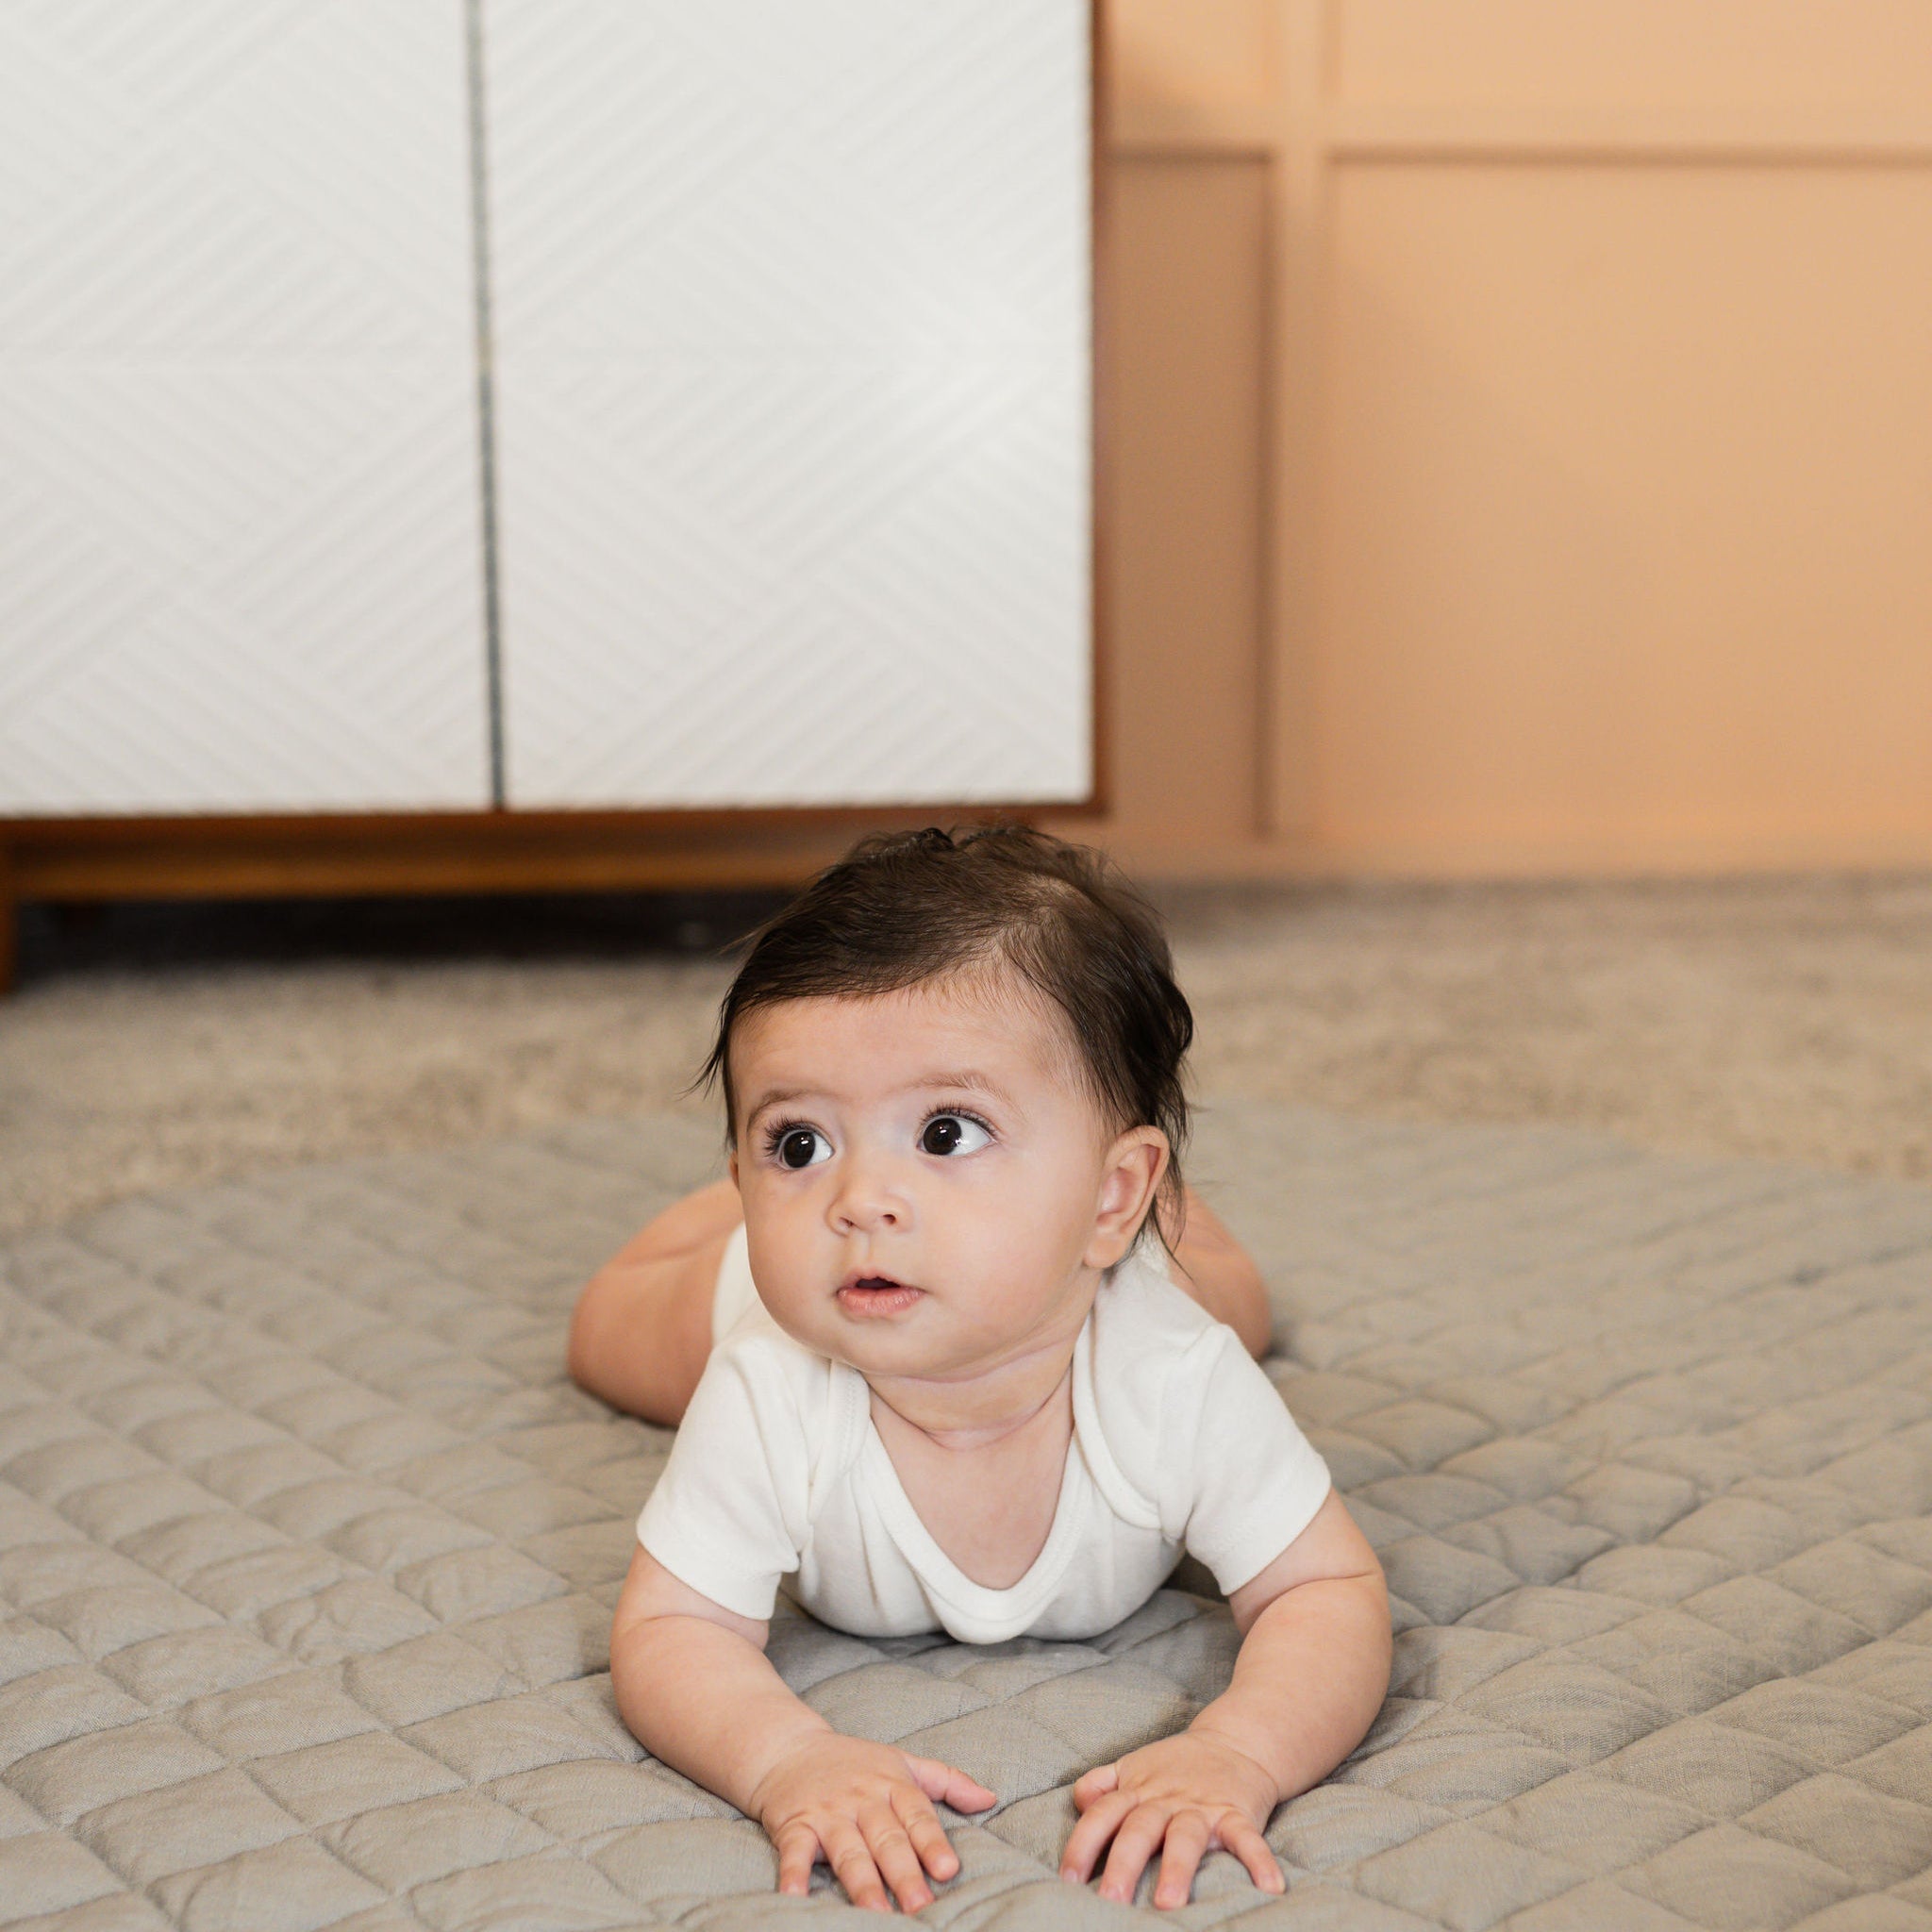 What to Look For in a Non-Toxic Play Mat